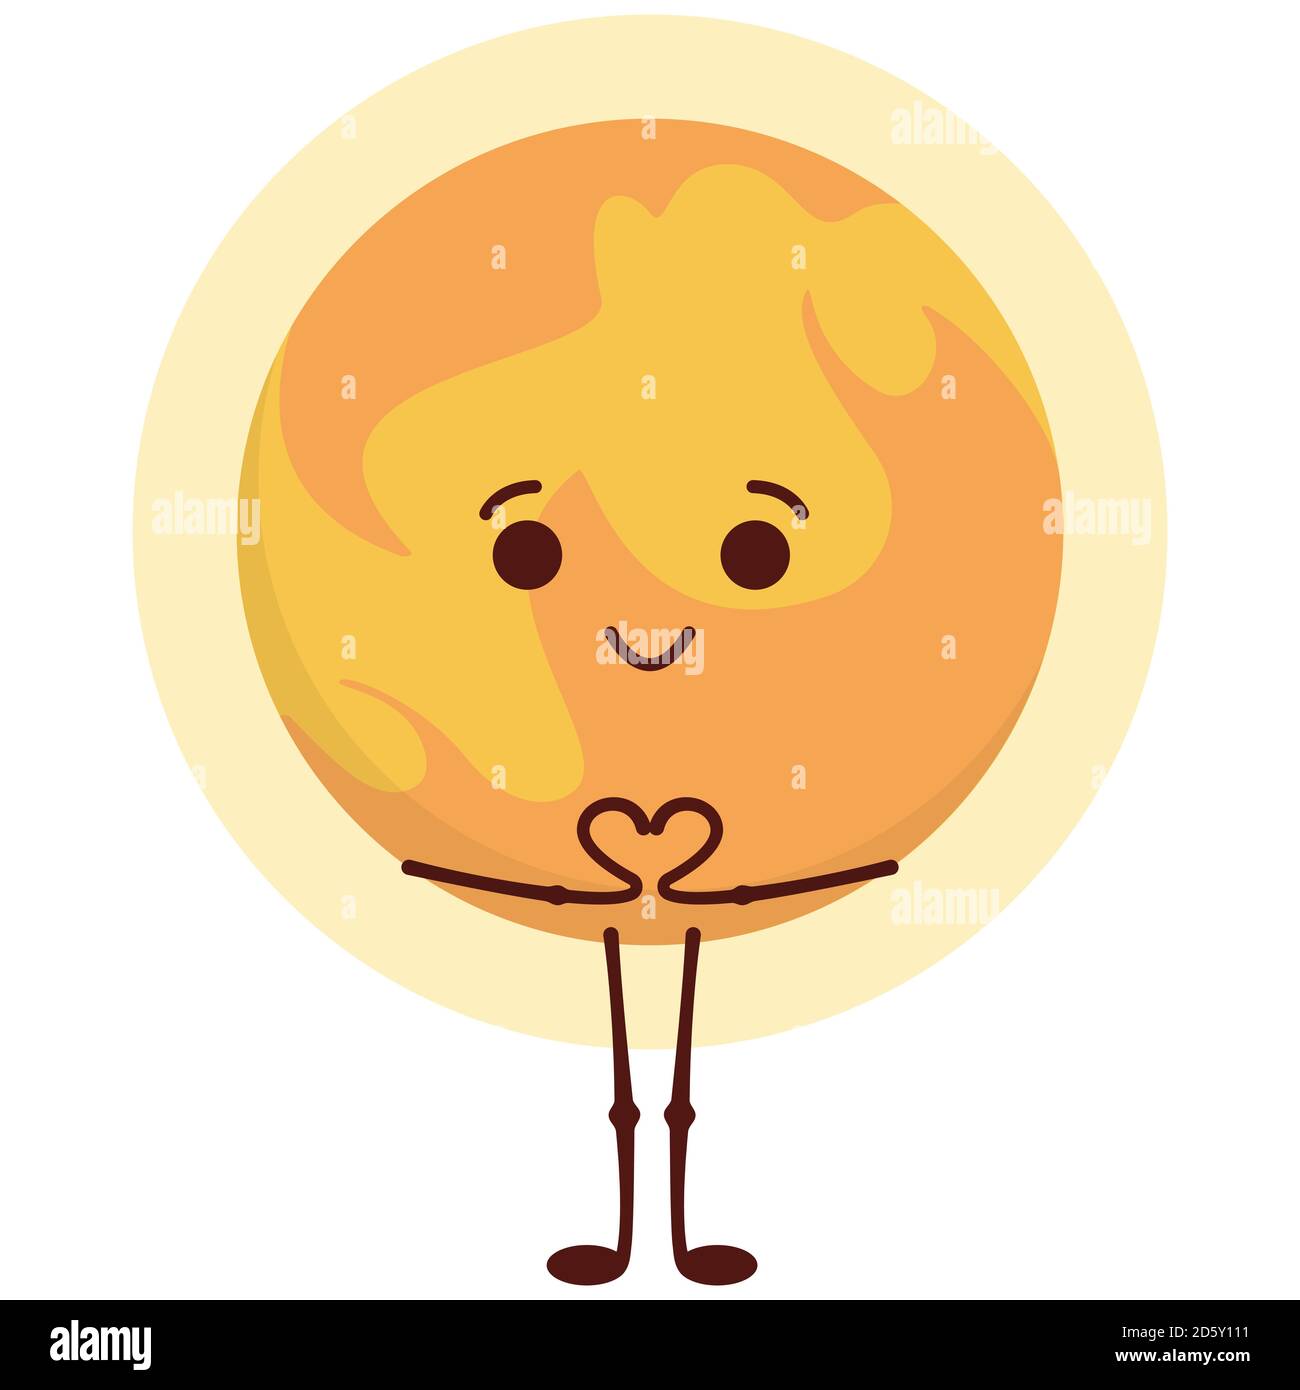 Sun in cartoon style. Cute space character. Stock Vector